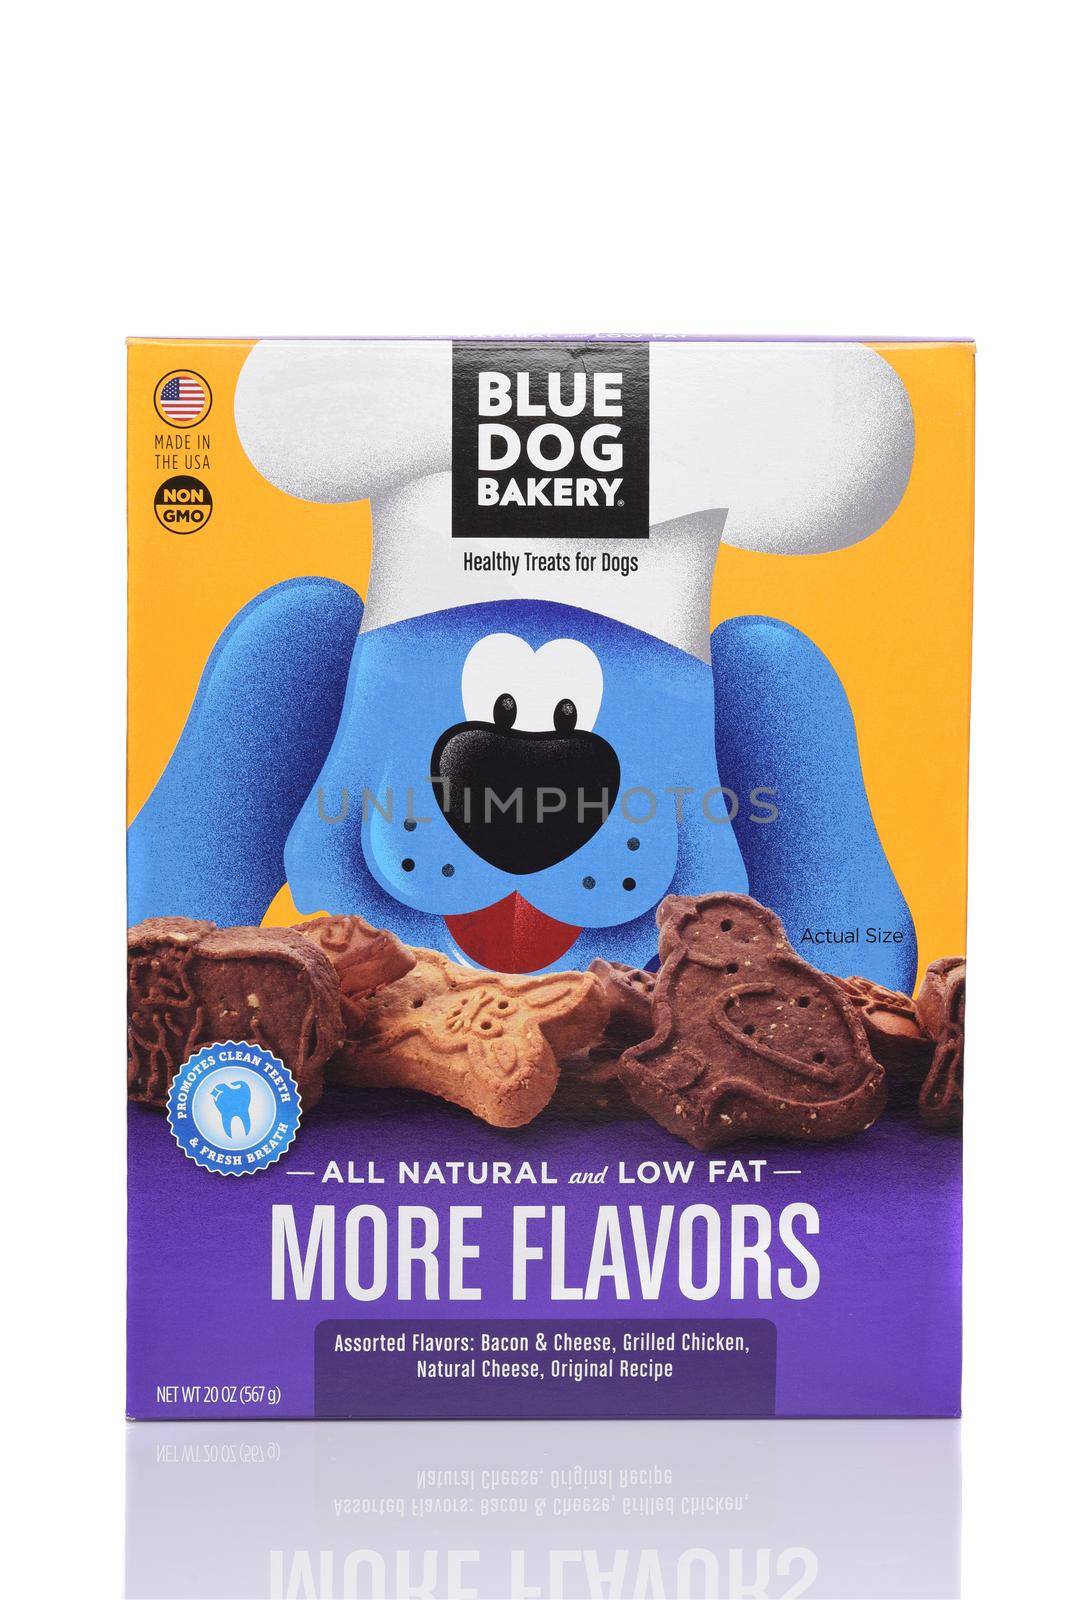 IRVINE, CALIFORNIA - 4 OCT 2019: A box of Blue Dog Bakery More Flavors healthy dog treats. by sCukrov